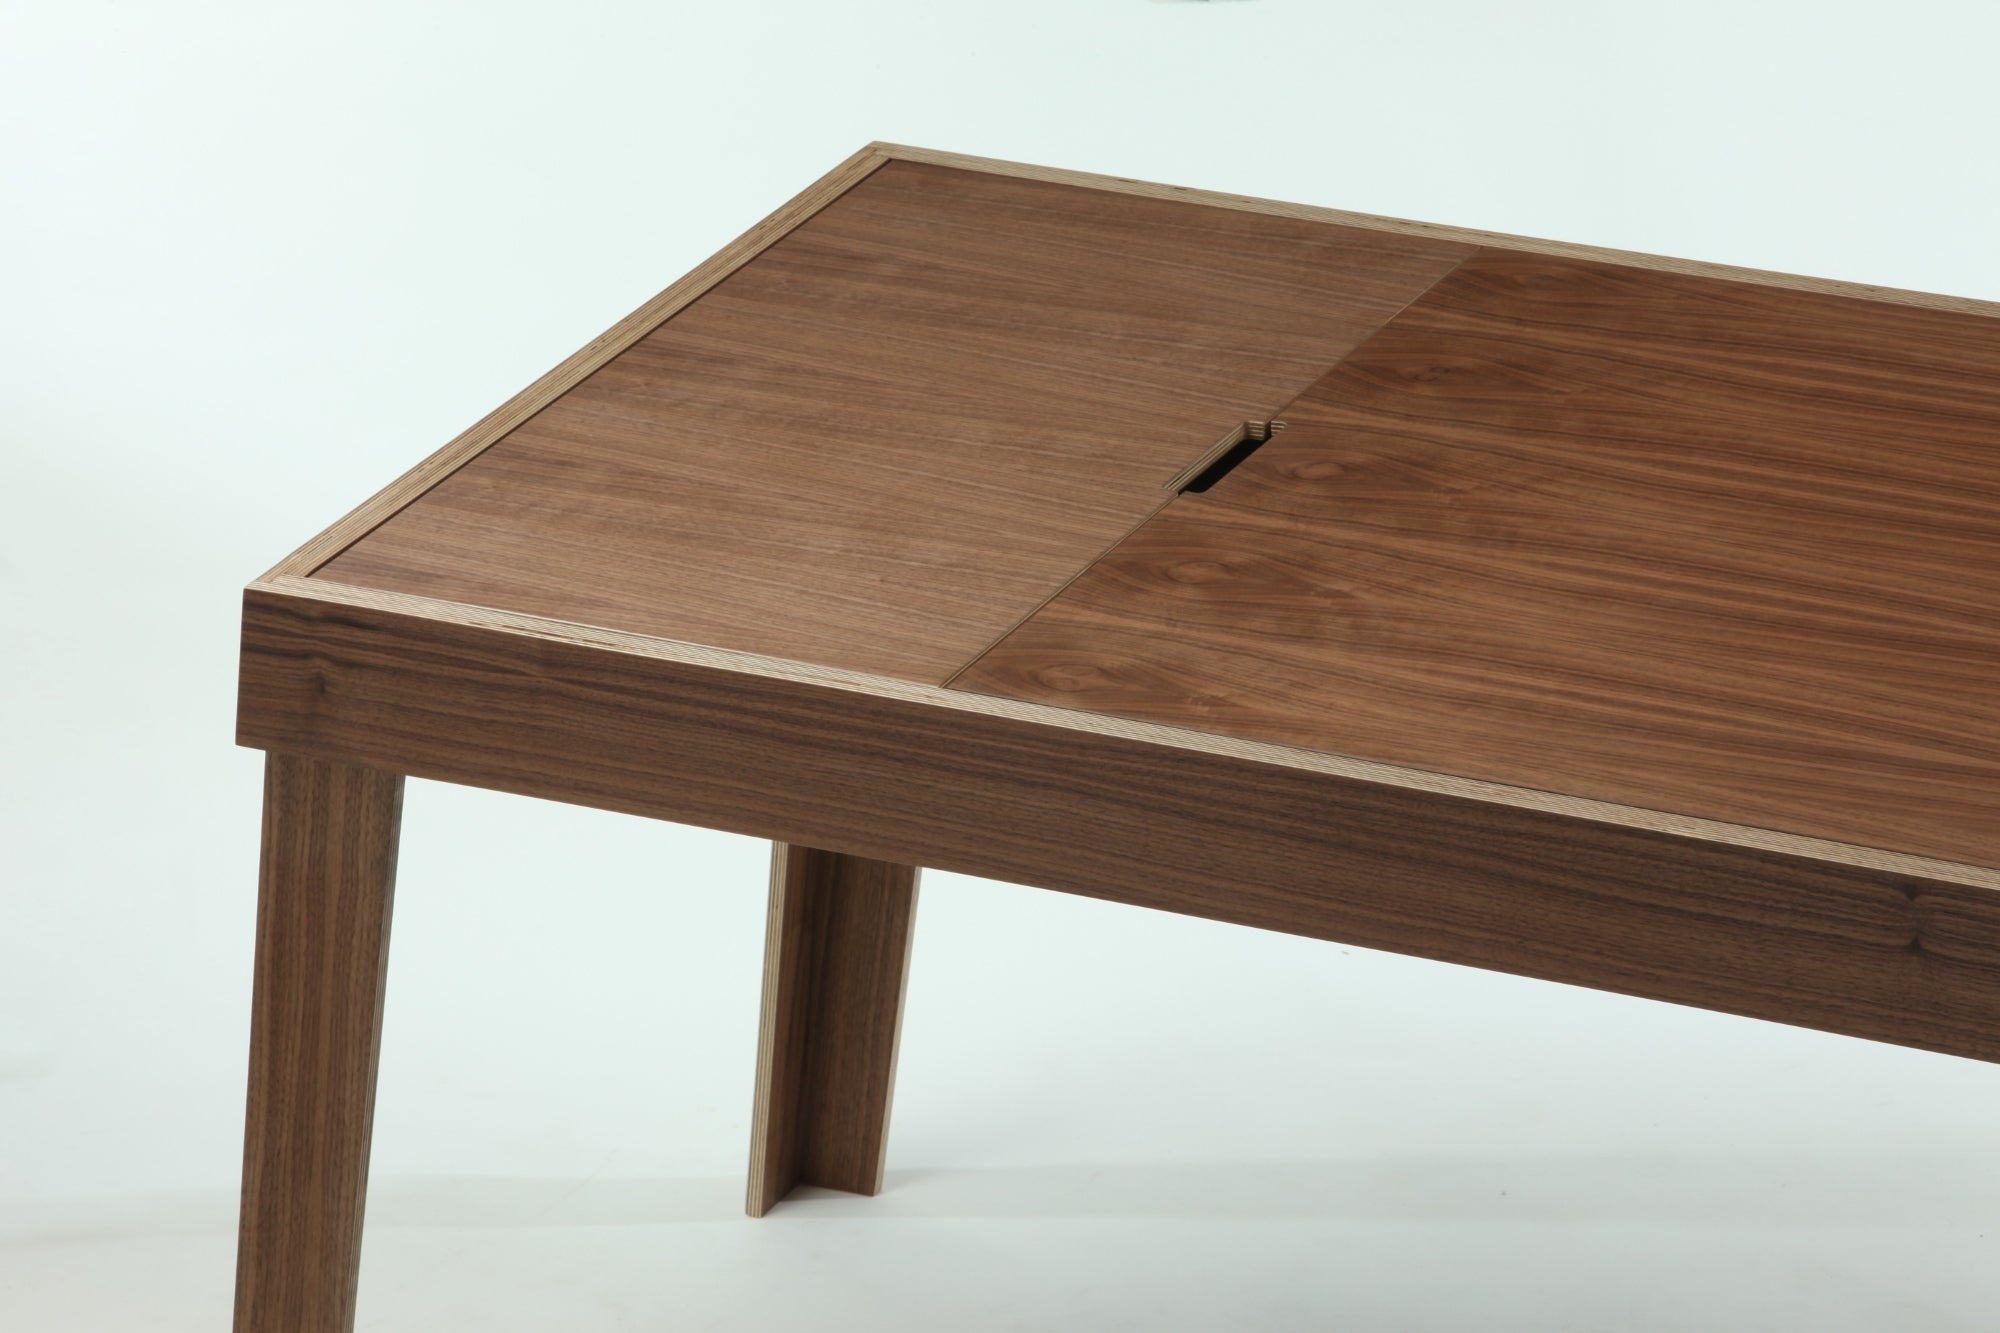 Mod | Large Two-Toned Birch Plywood Desk